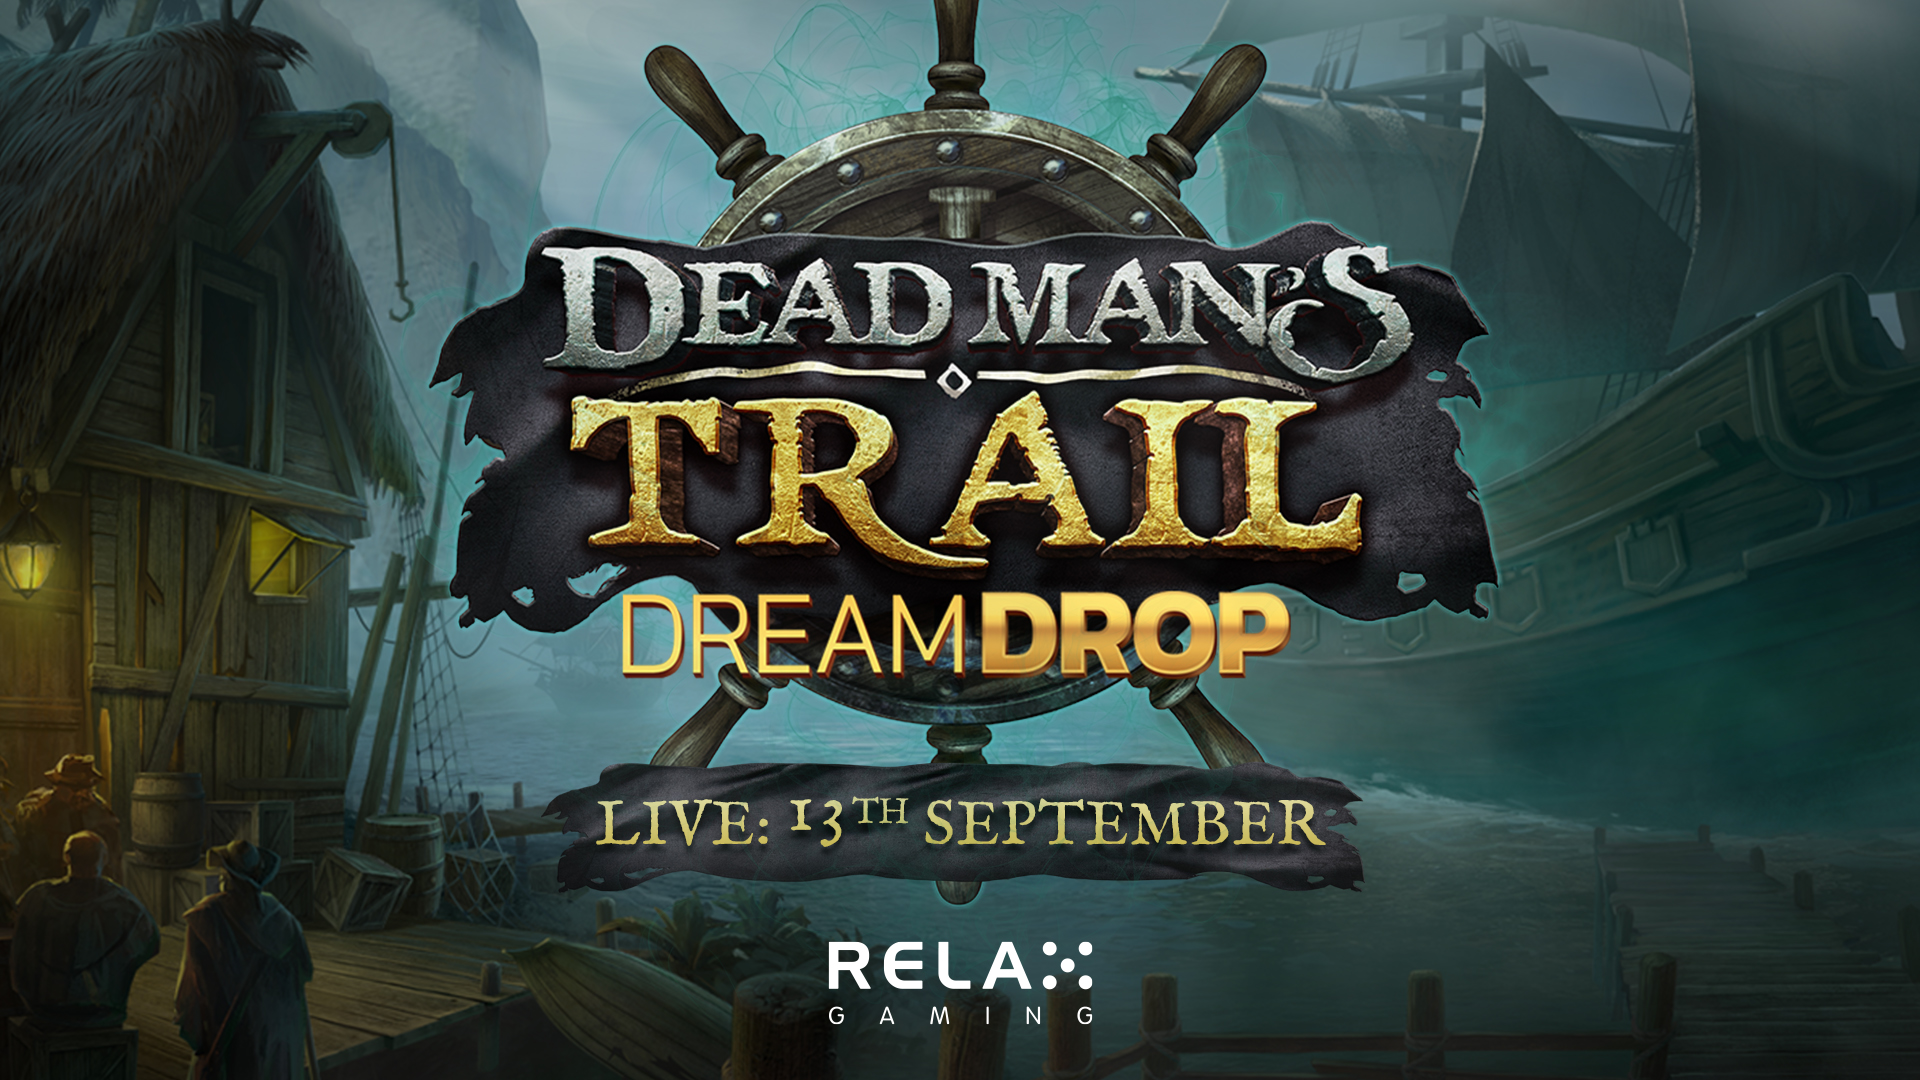 Plunder epic jackpots in Relax Gaming release Dead Man’s Trail Dream Drop